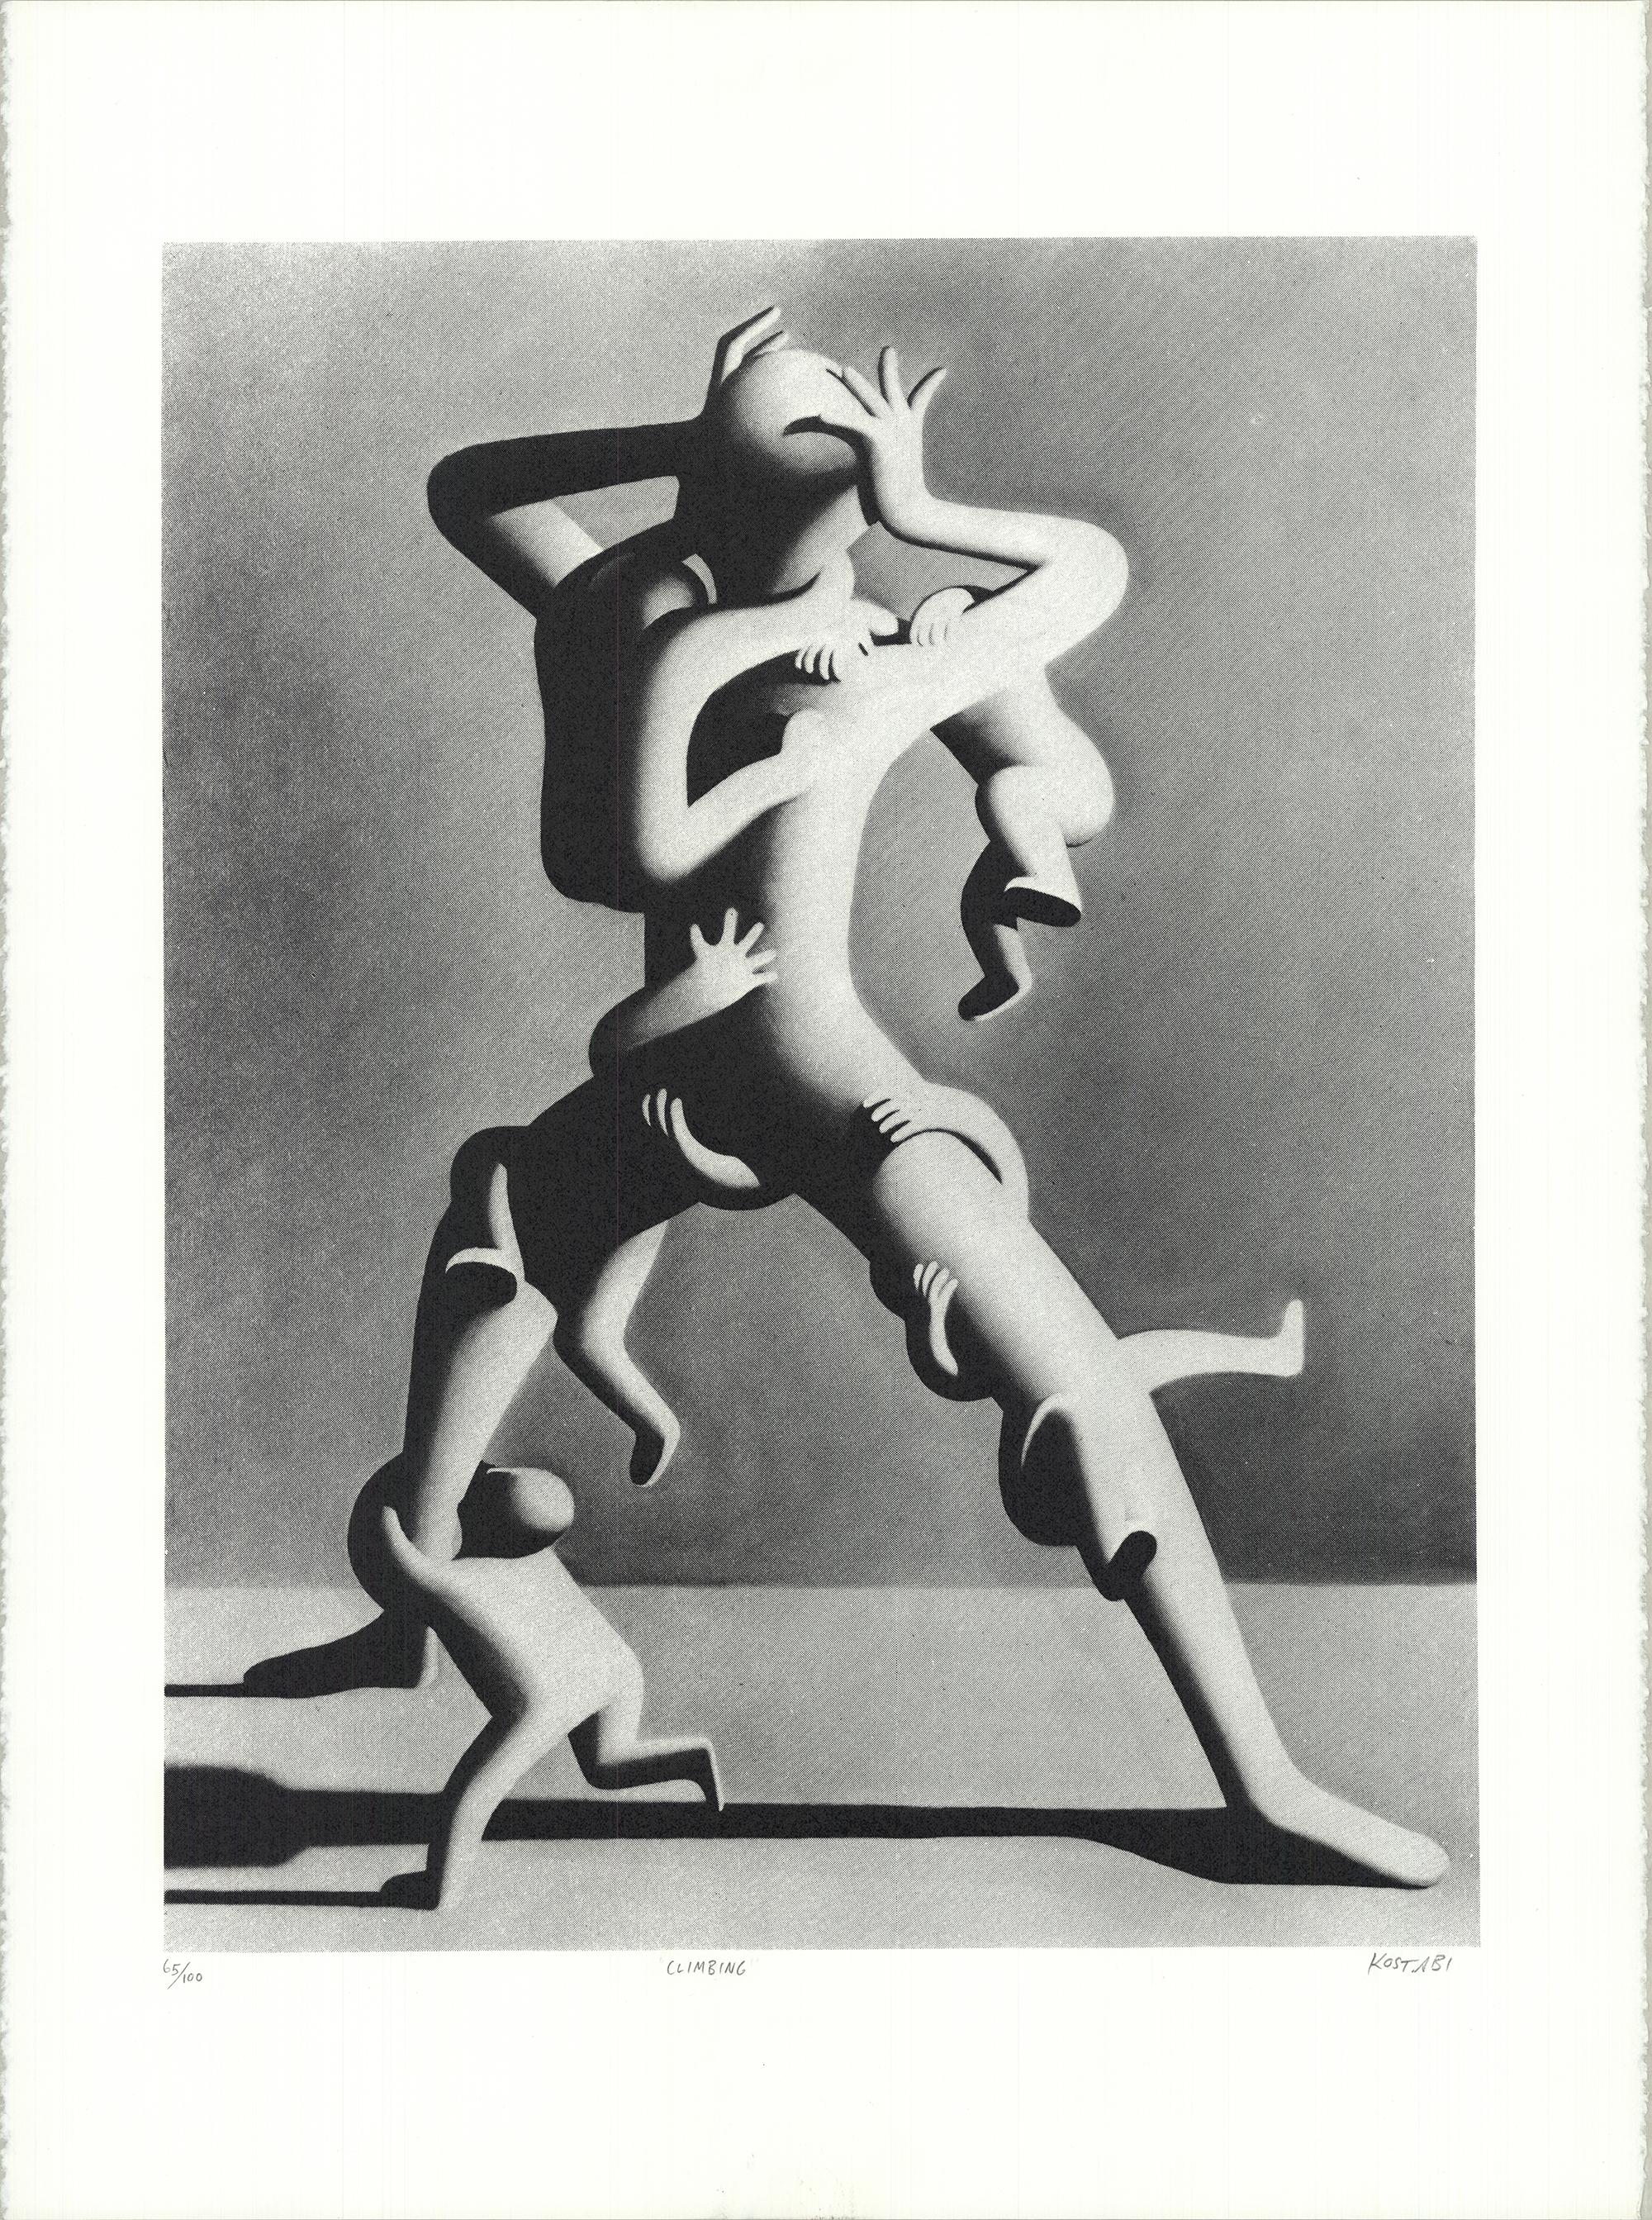 Paper Size: 30 x 22 inches ( 76.2 x 55.88 cm )
Image Size: 23 x 17.75 inches ( 58.42 x 45.085 cm )
Framed: No
Condition: A: Mint

Additional Details: Hand pulled lithograph by Mark Kostabi, pencil signed and numbered by Mark Kostabi. It is a very